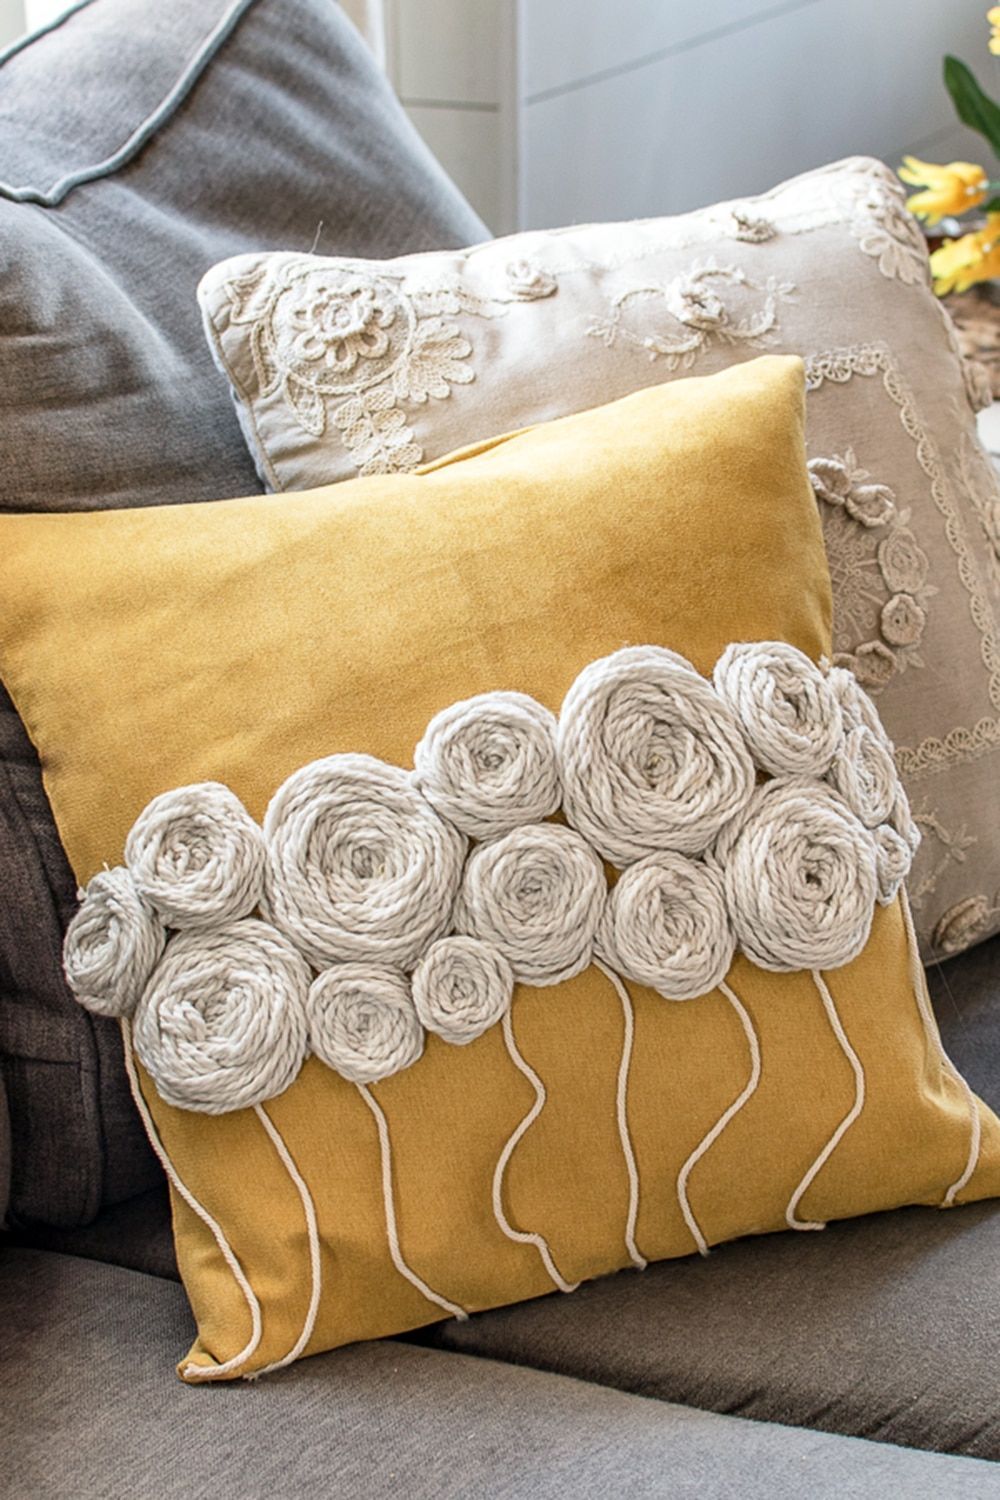 How to Make Wool Embroidery Flowers to Perk up Plain Cushions -   18 diy pillows food
 ideas